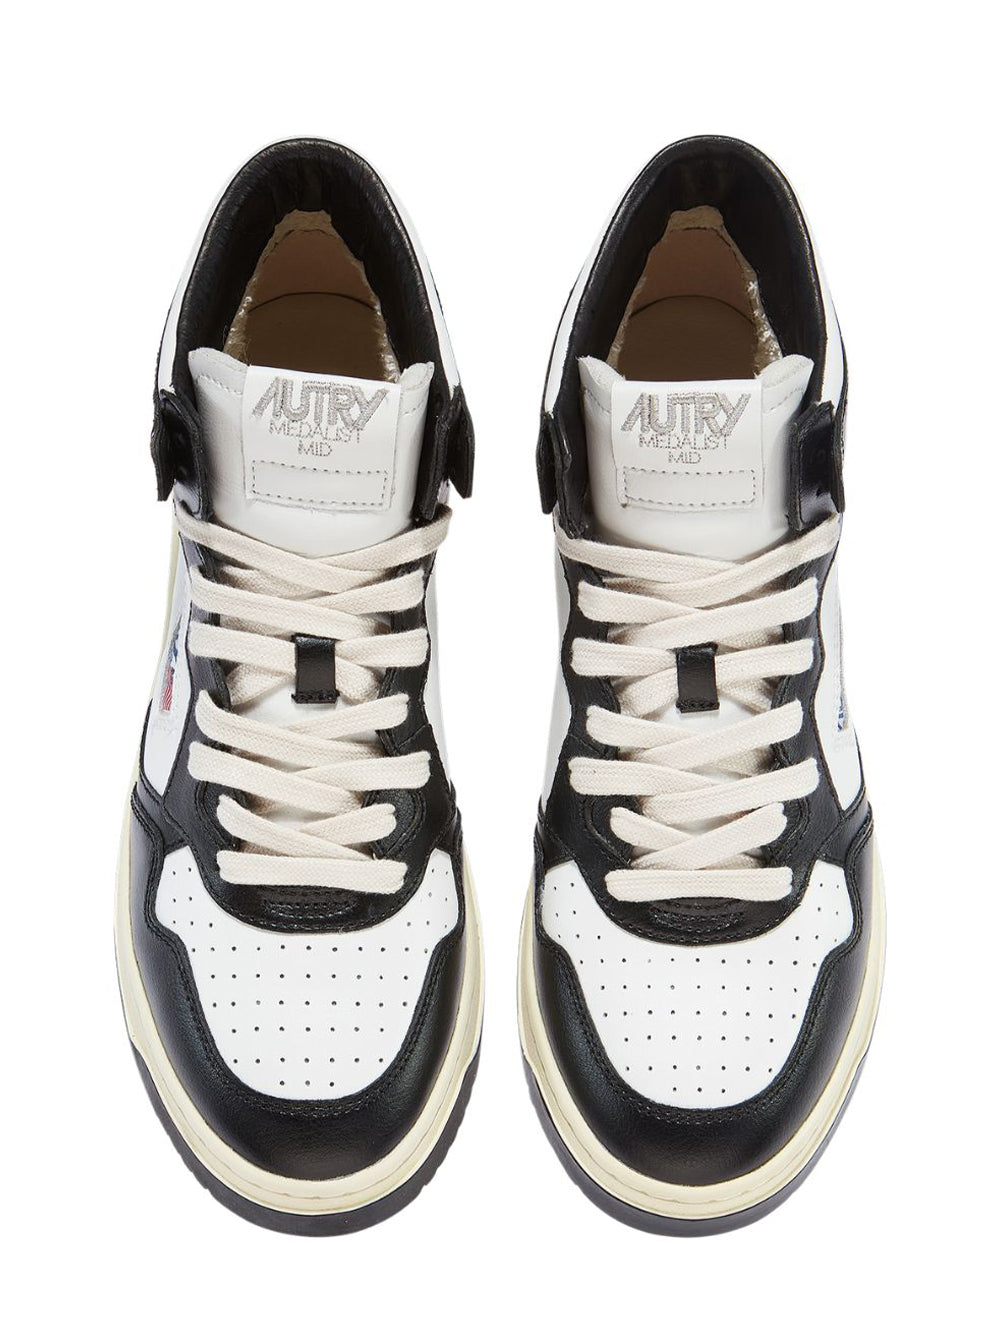 Medalist Mid Sneakers In Two-Tone Leather (White And Black) (Women)